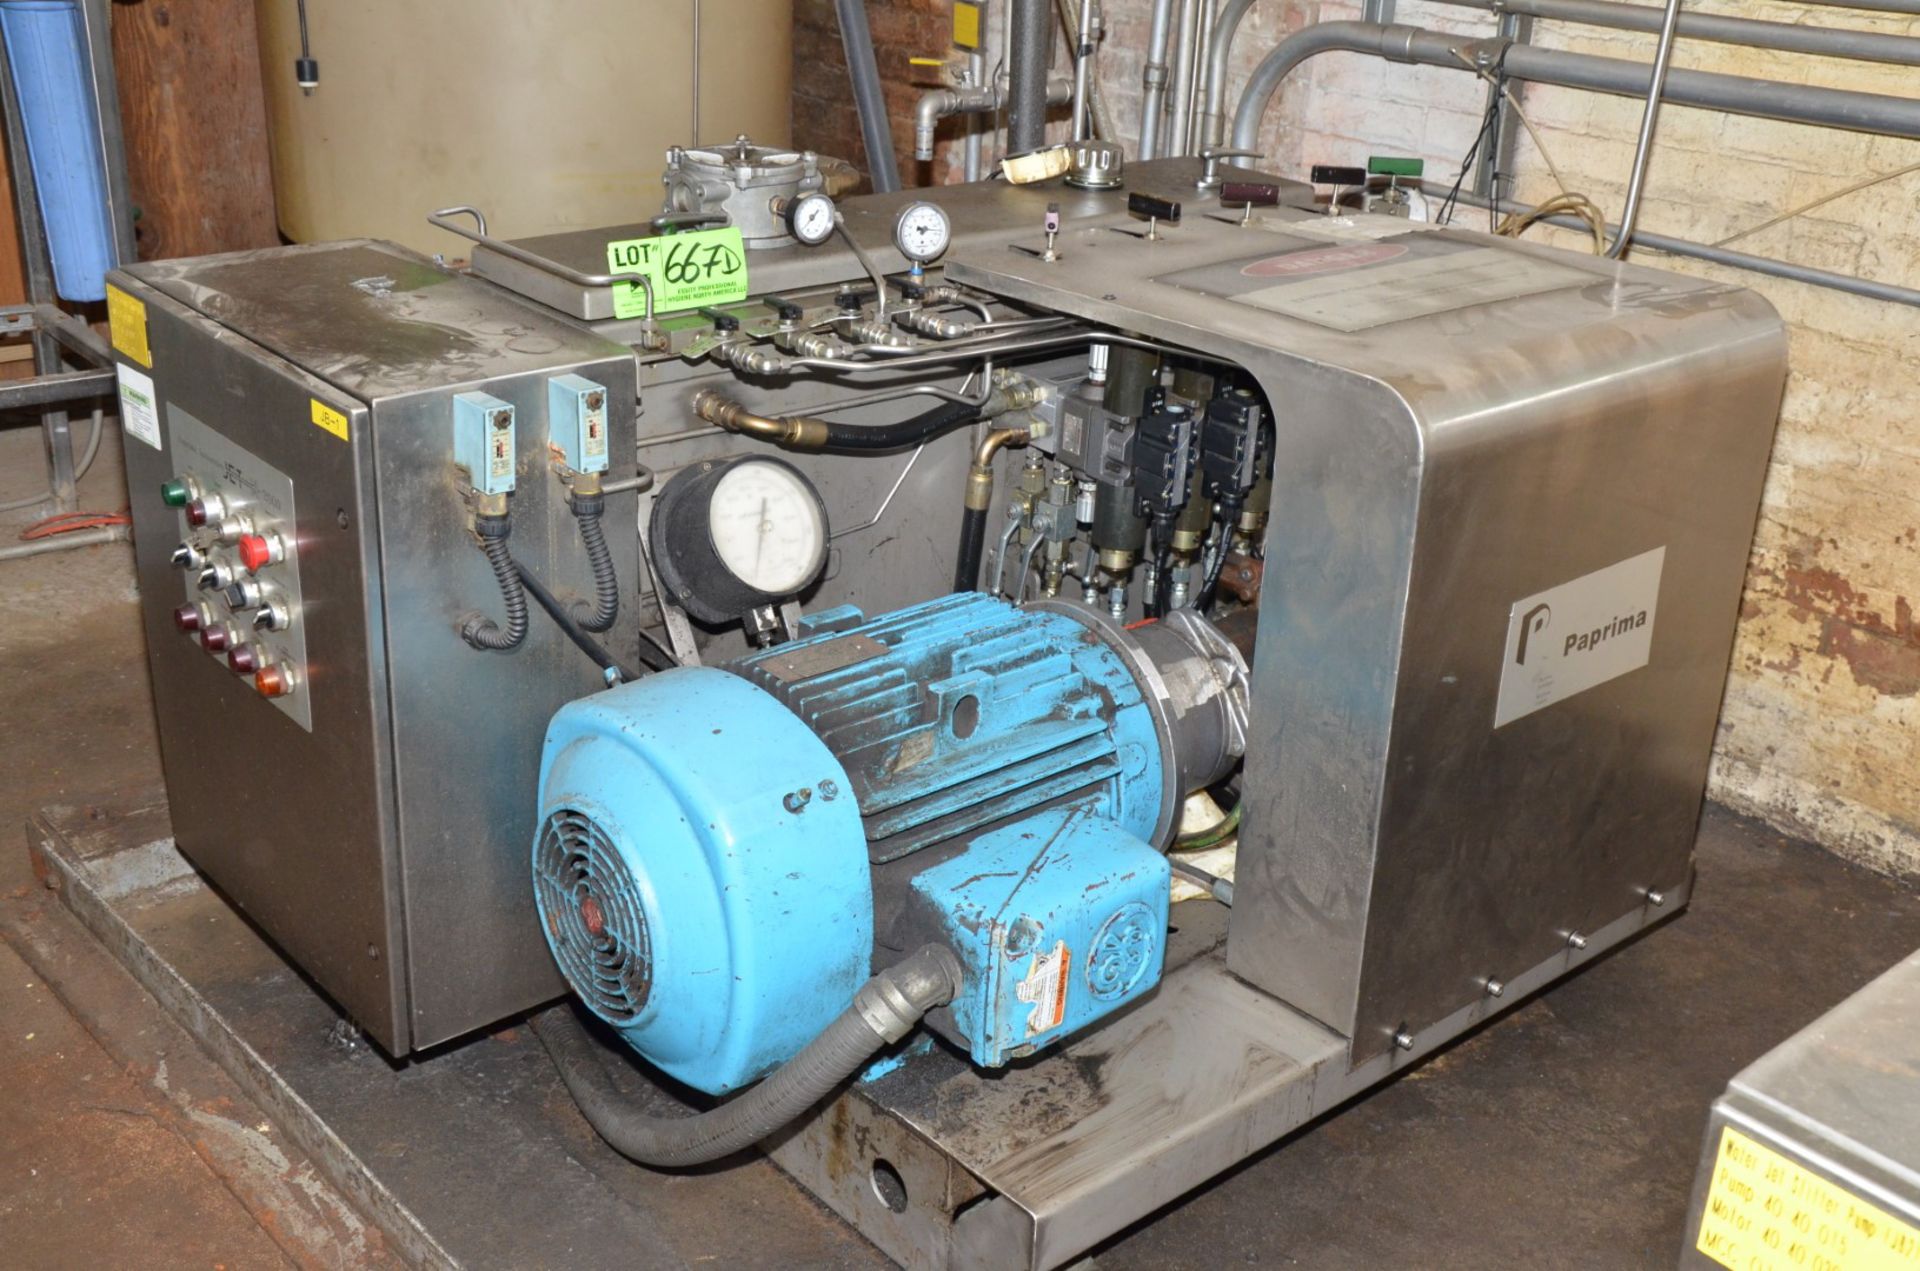 JET-X MODEL 2000 INTENSIFIER PUMP WITH 20,000 PSI MAX OPERATING PRESSURE, S/N N/A (CI) [RIGGING